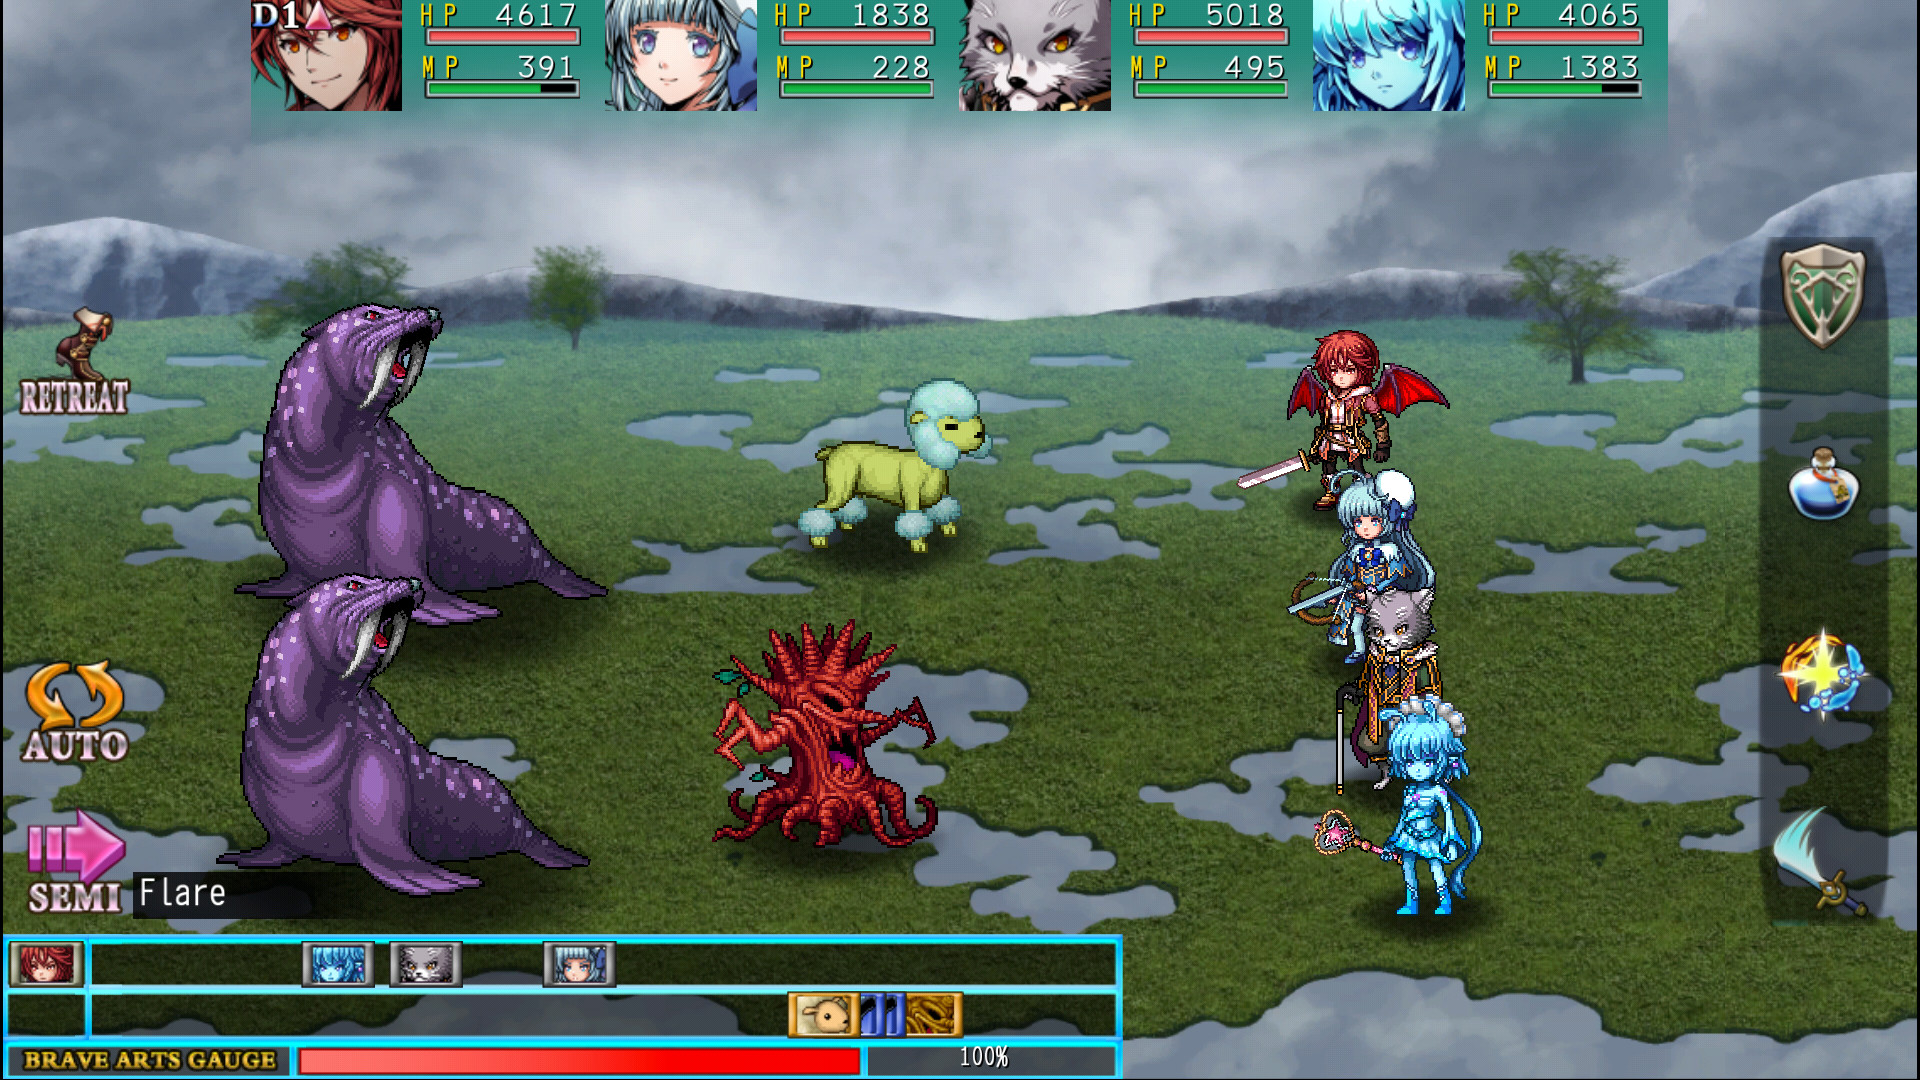 Online Browser Game Reviews: Lunaria Story - Online Browser-Based 2D RPG  Game Review